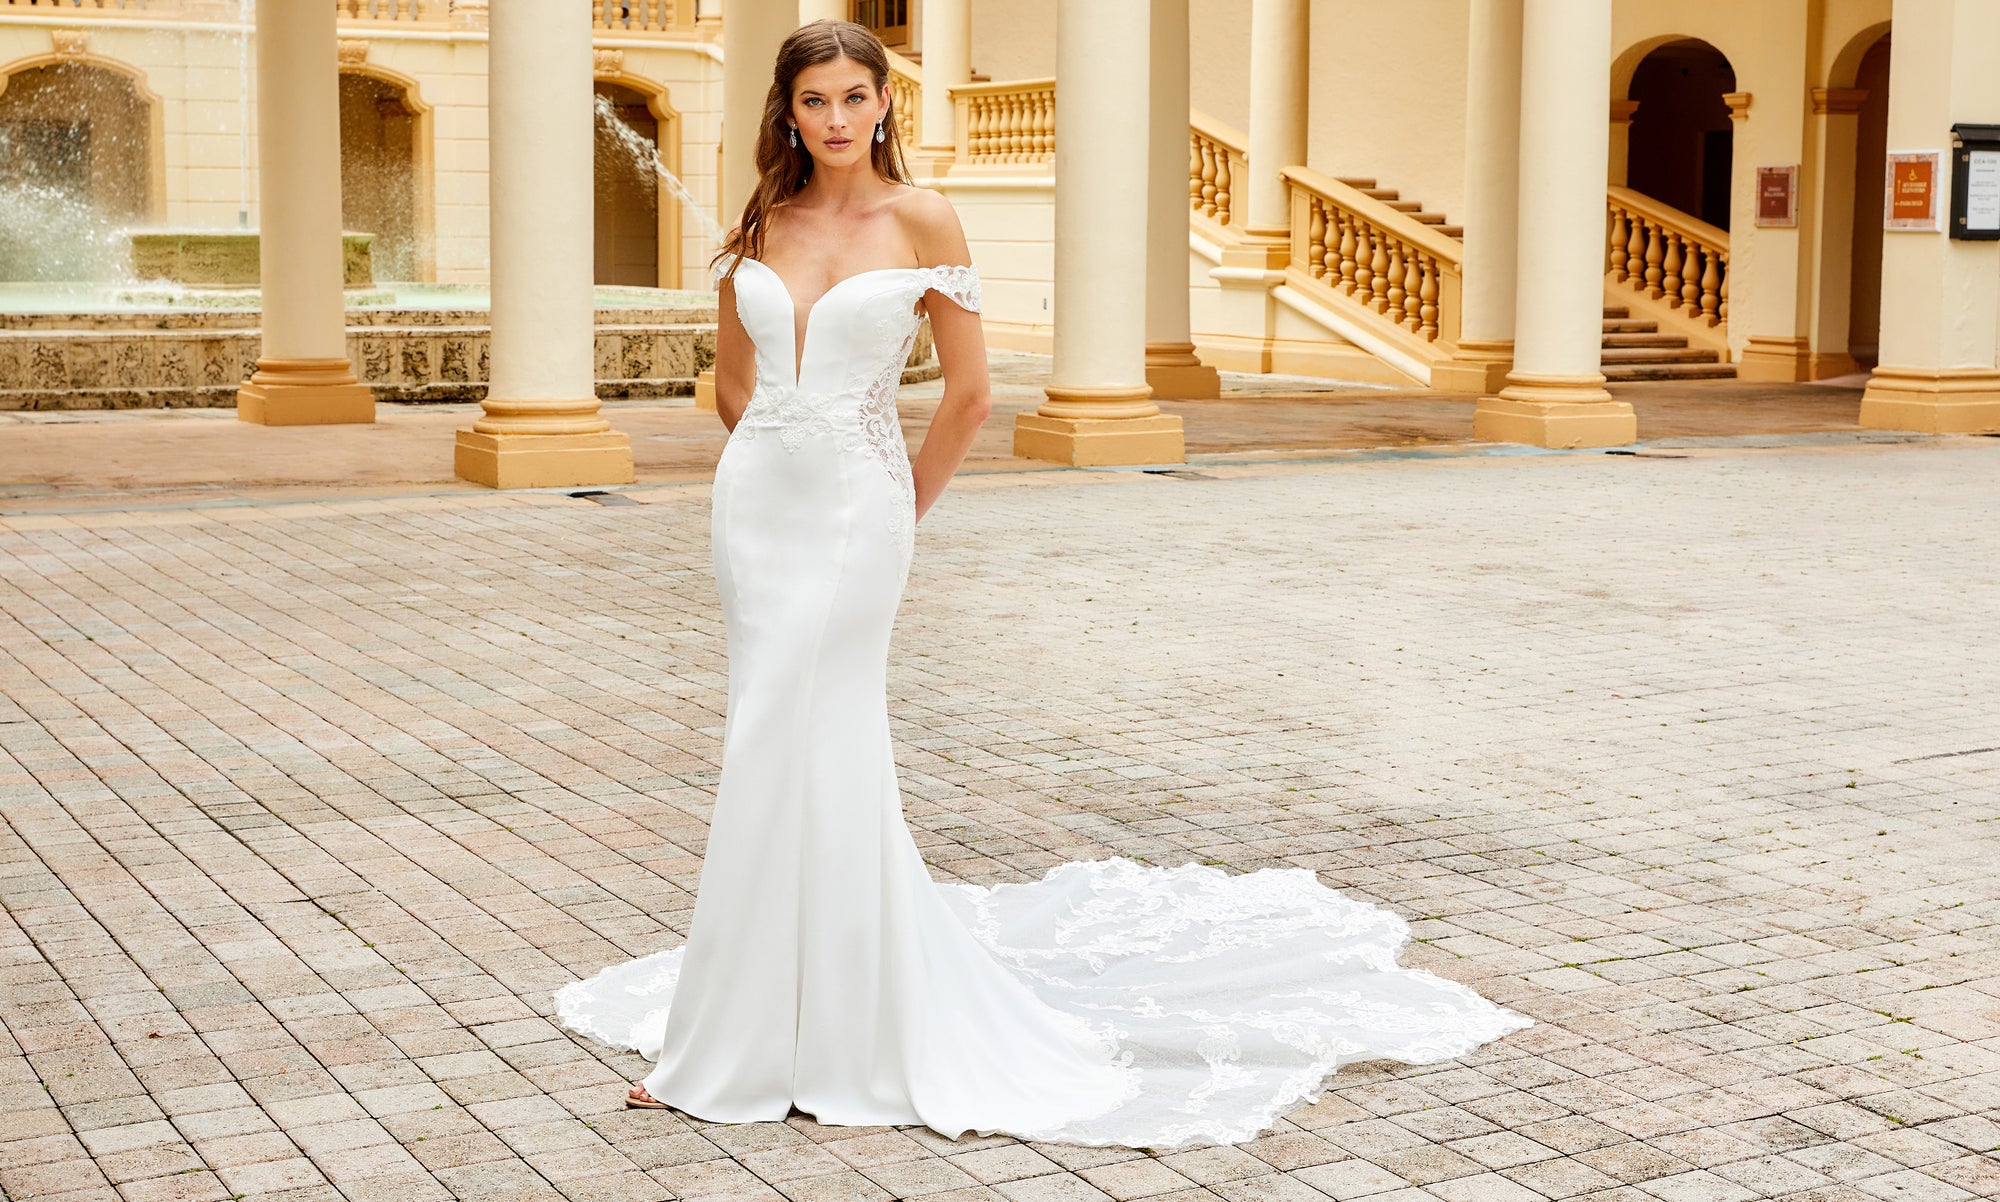 10 Captivating Beach Wedding Gowns for Your Seashore Celebration